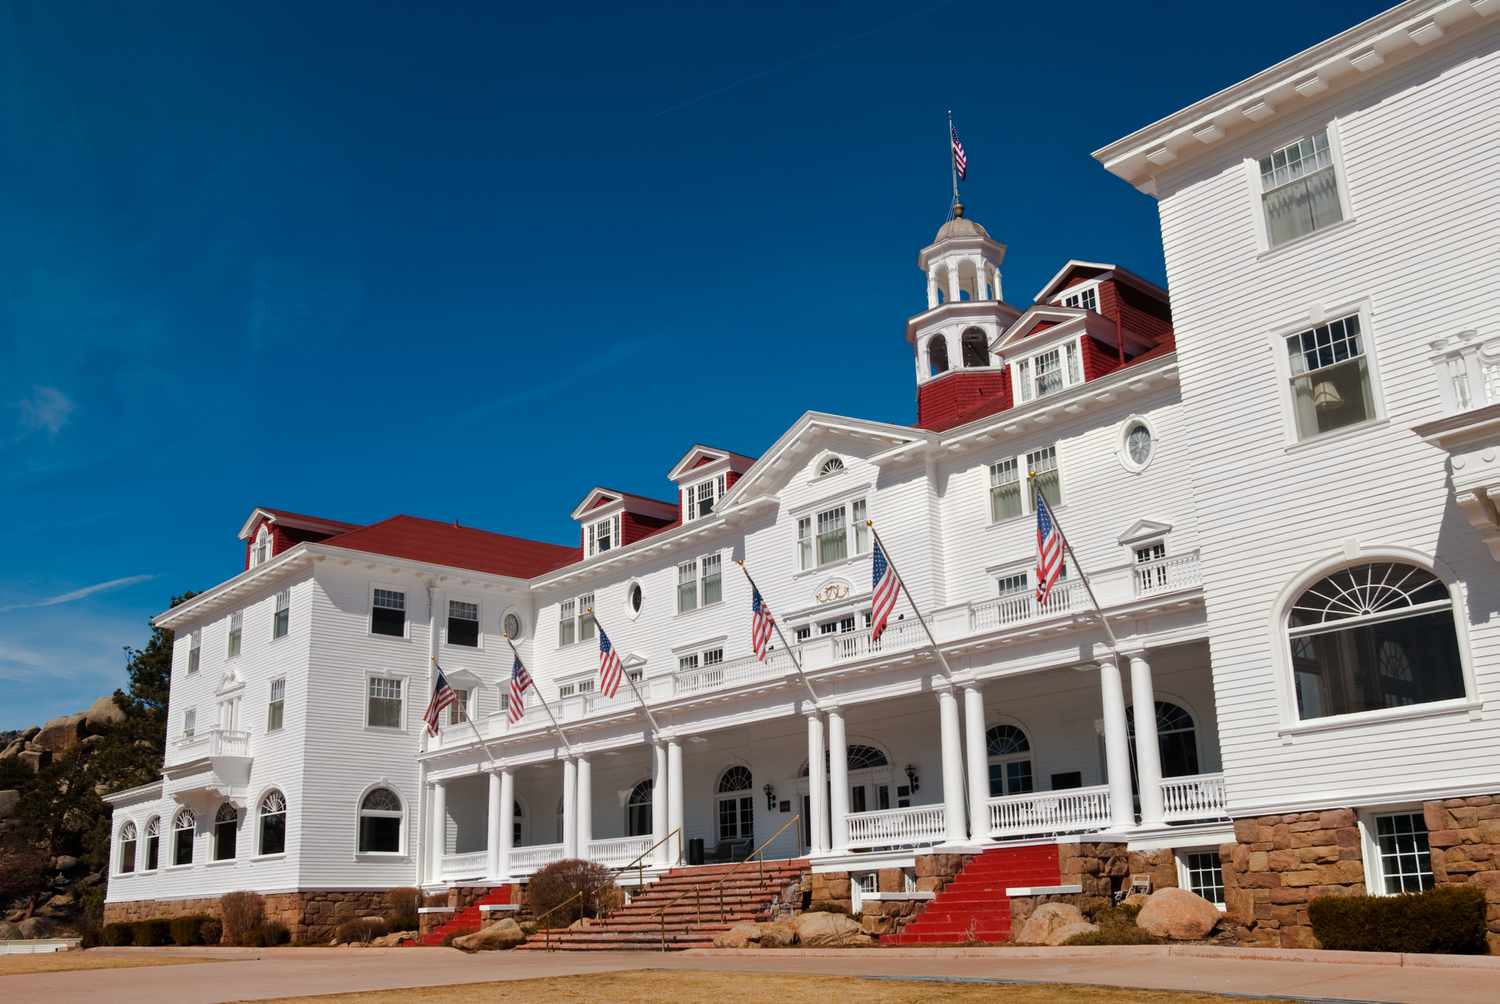 Stanley Hotel in Estes Park, Colorado from the side